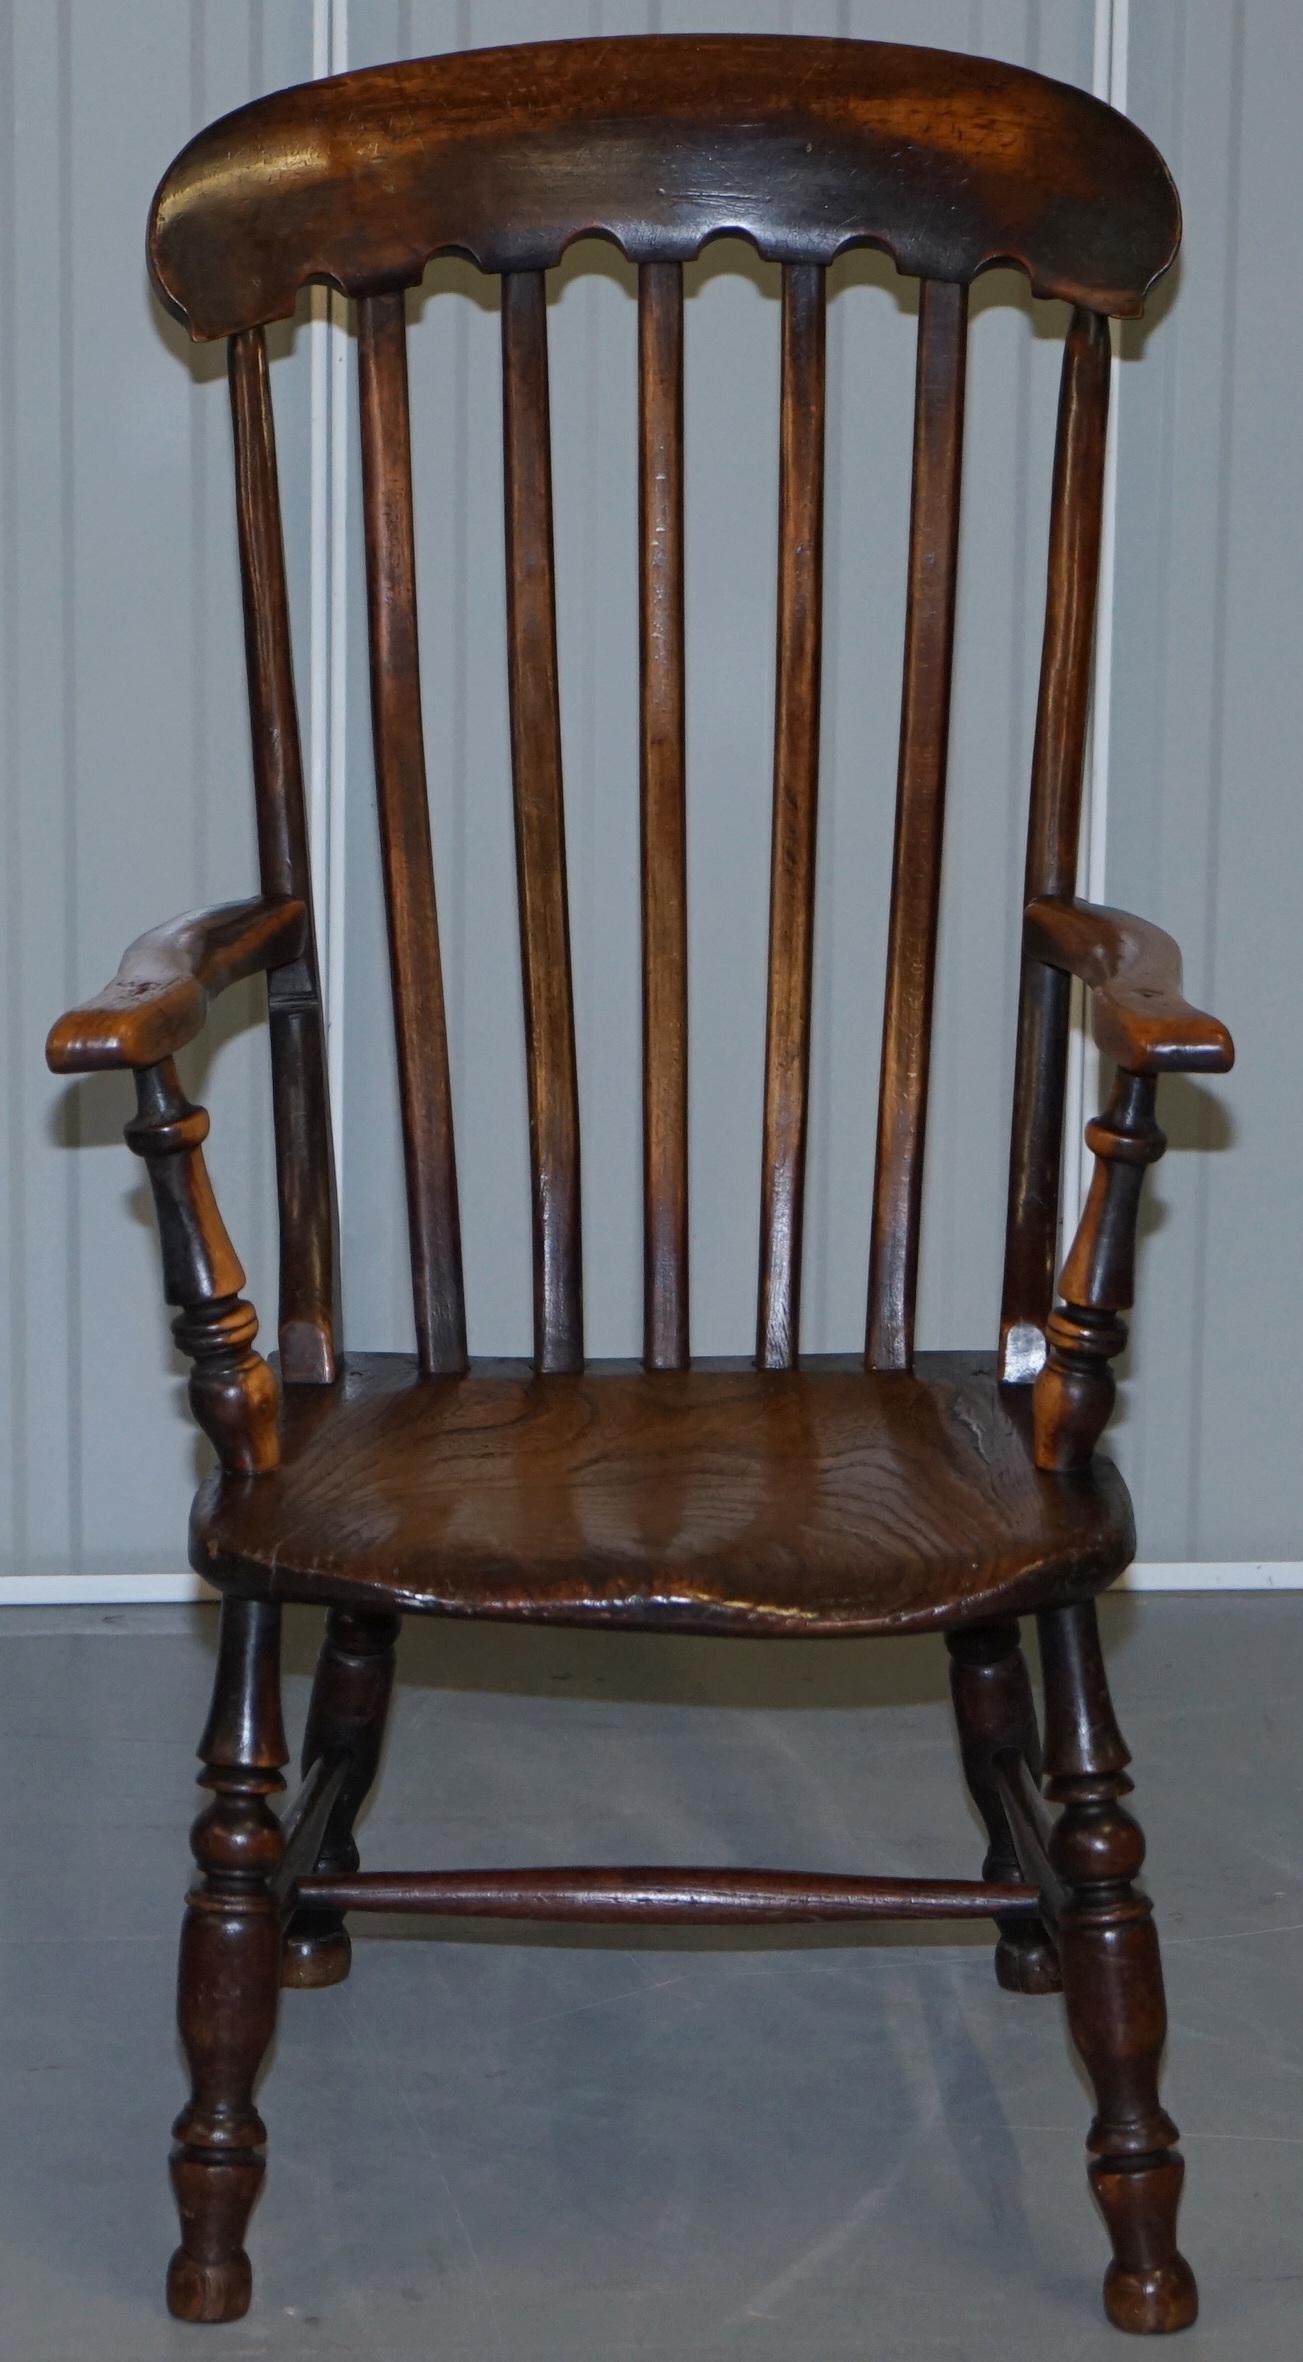 We are delighted to offer for sale this stunning 19th century Elm Thames Valley Windsor armchair with original paint

A highly coveted, well made and decorative armchair, in the traditional Elm, this is an Thames Valley version, You can see traces